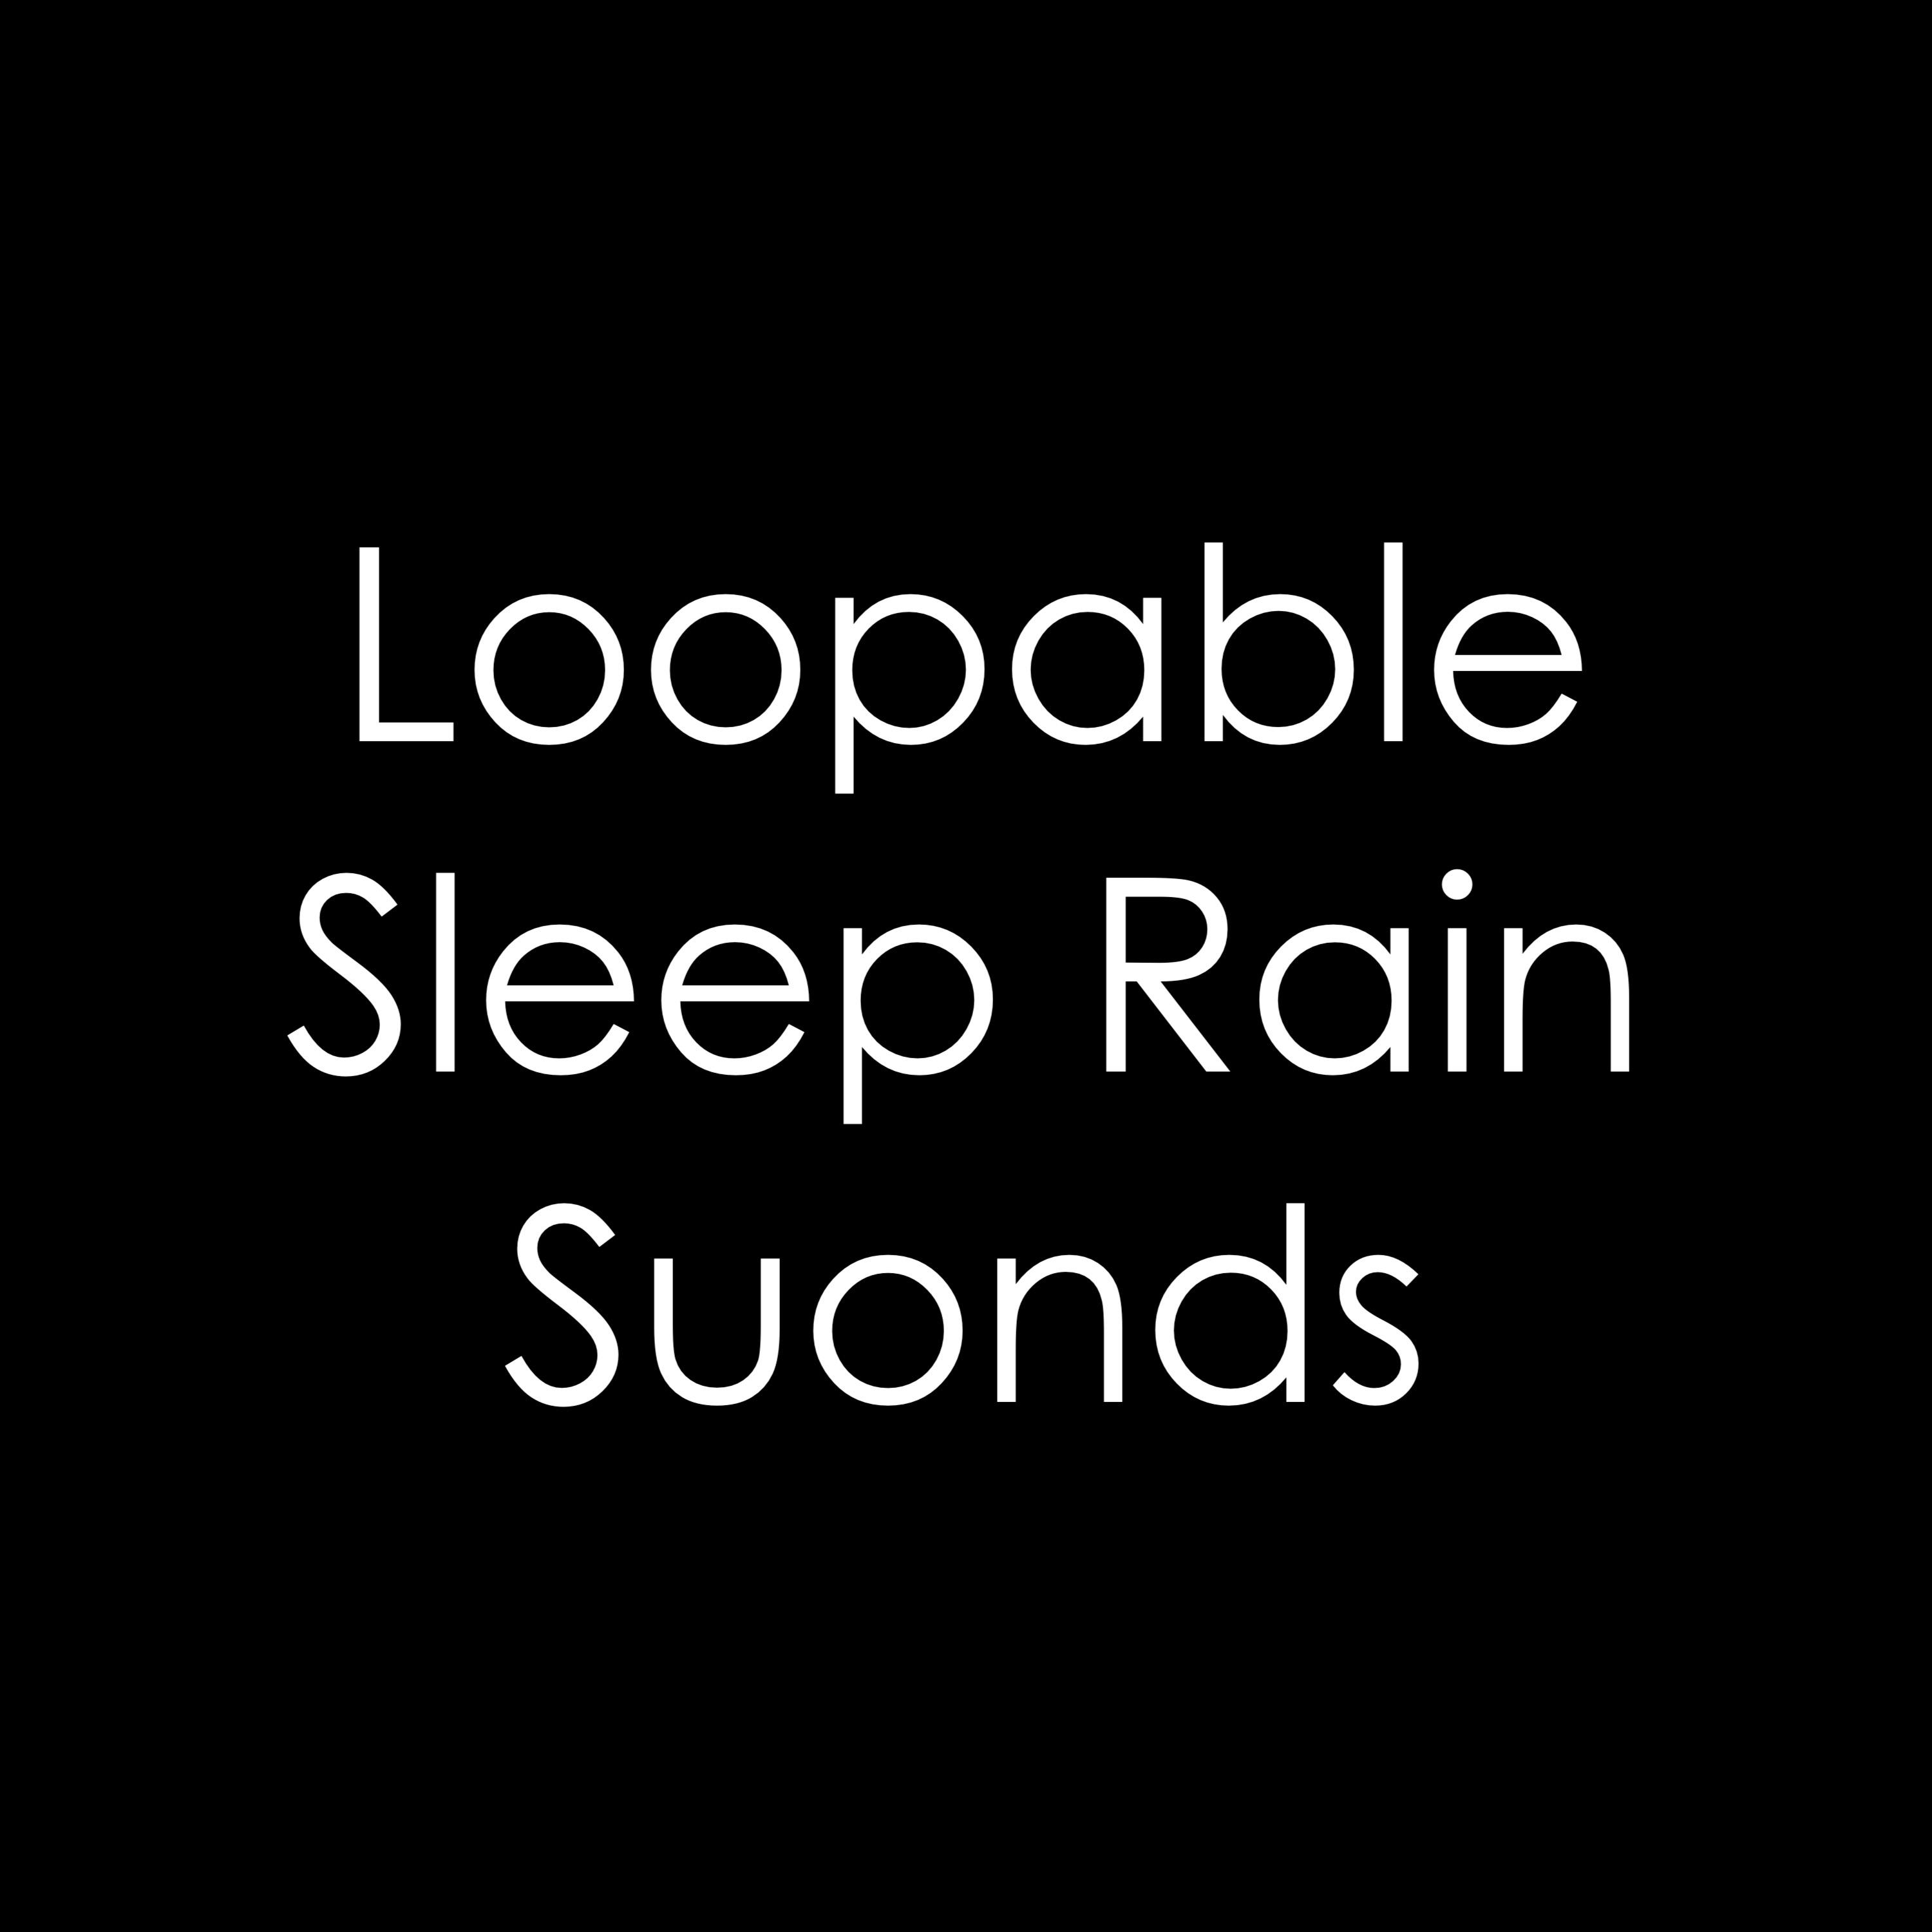 09 Short Loopable Rain Sounds for Sleep and Relaxation